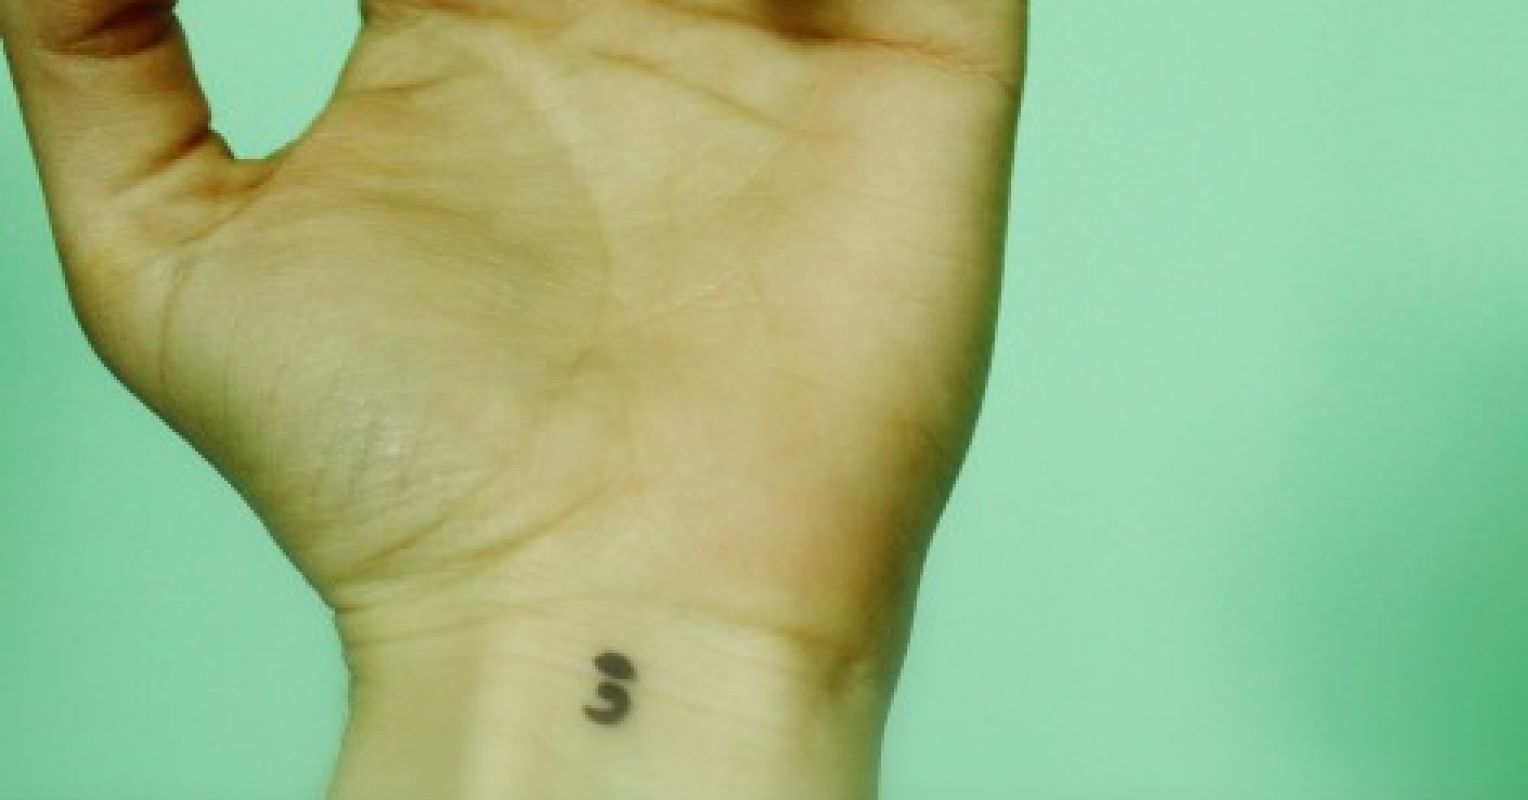 Semicolon Punctuates Mental Health Awareness | Psychology Today